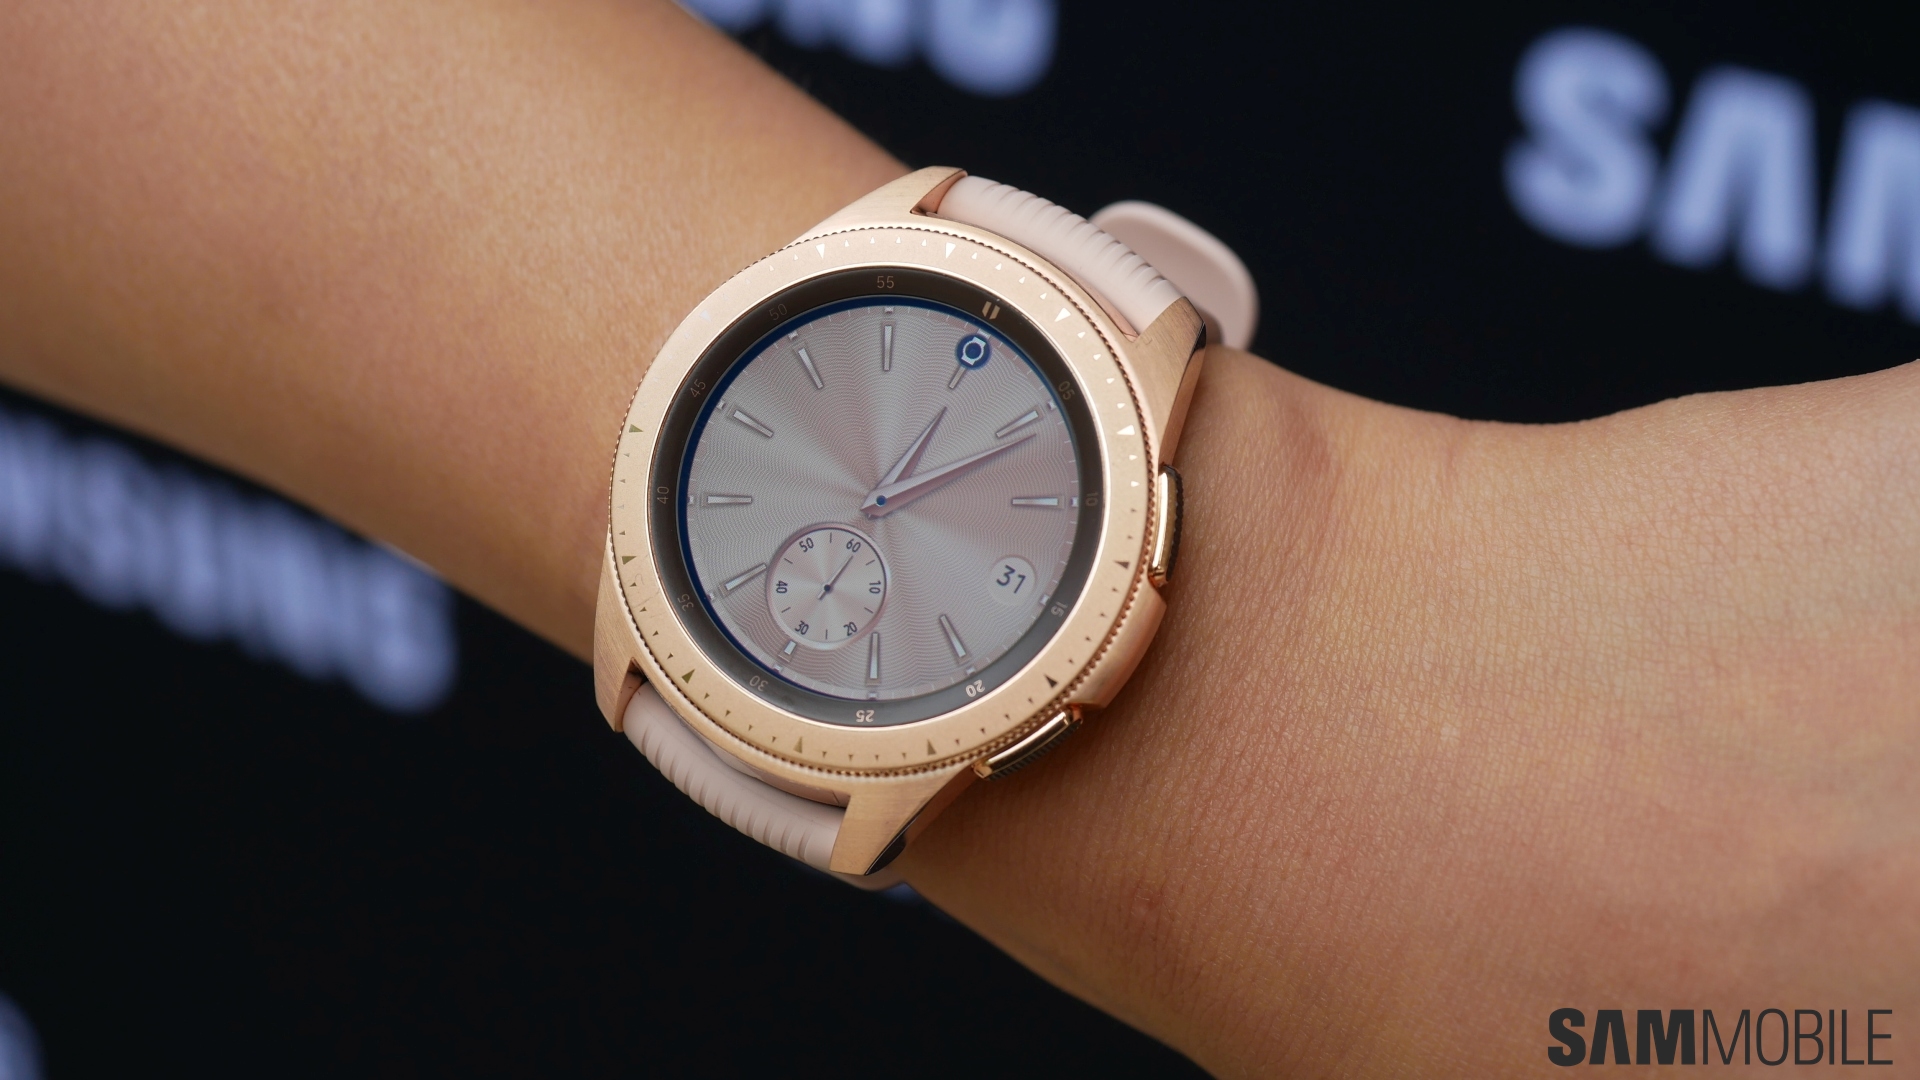 Samsung Galaxy Watch price and release date confirmed SamMobile